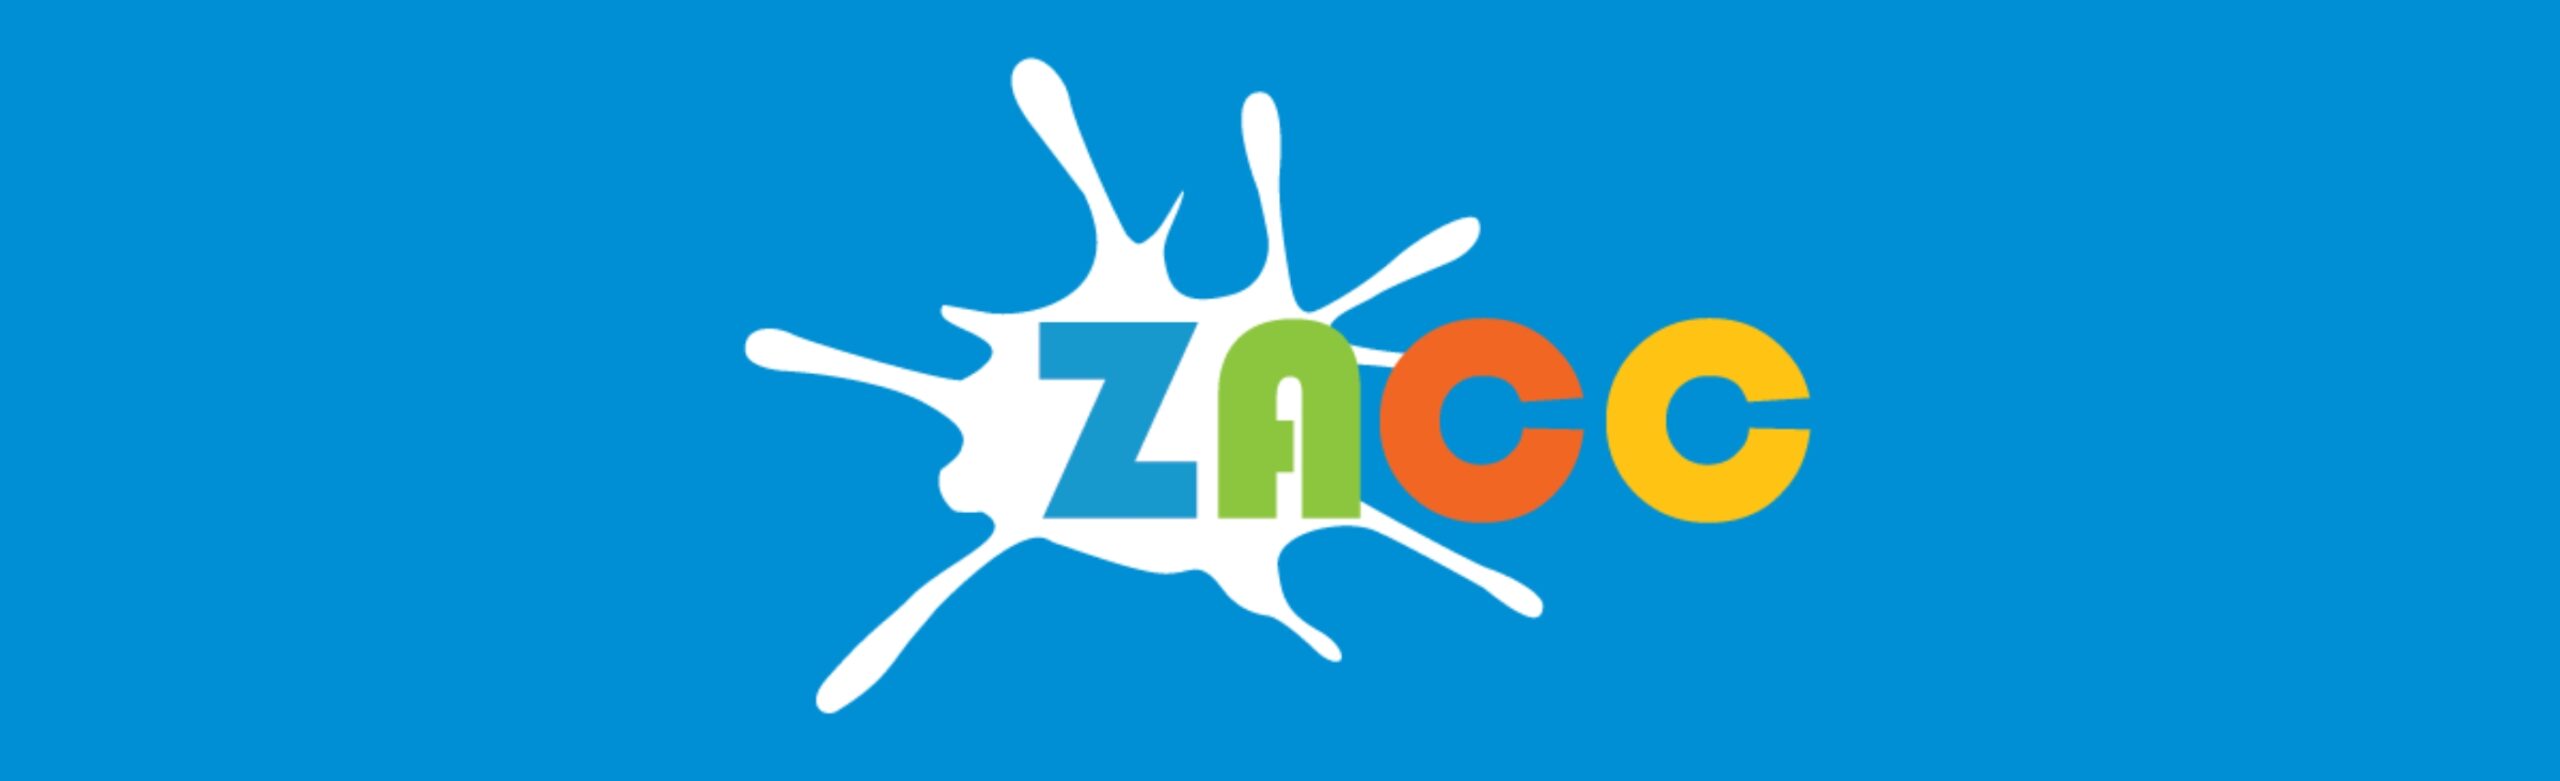 ZACC Rock Camp to Make Debut at The Wilma Image